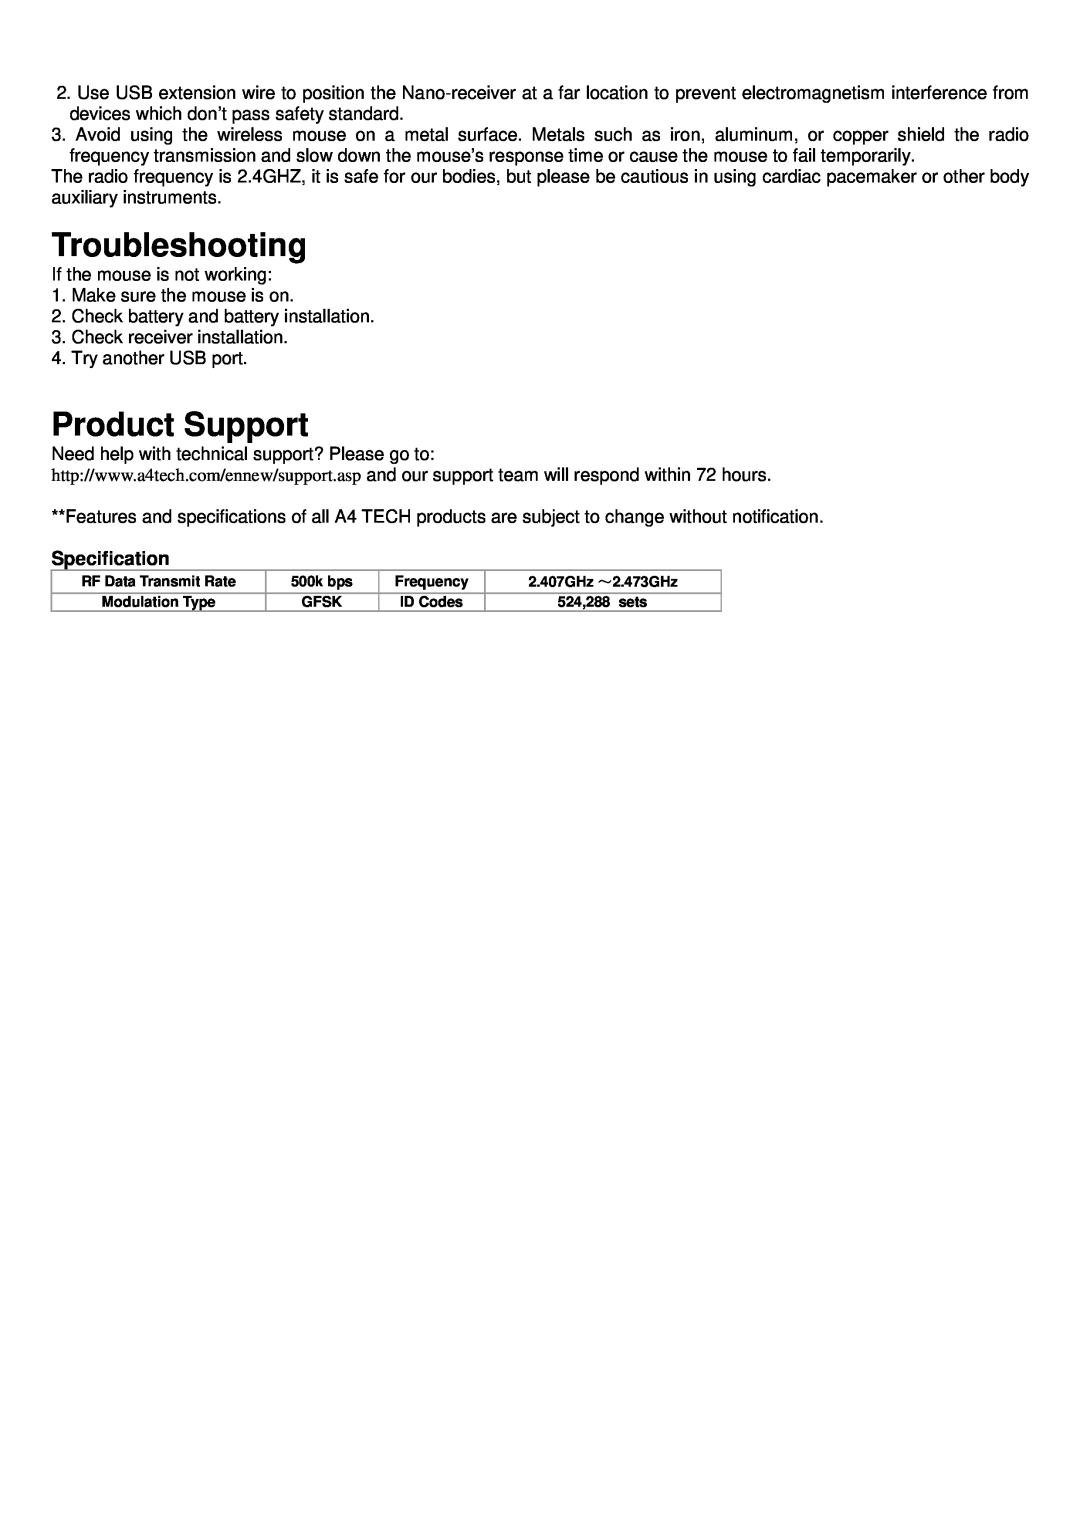 A4 Tech G7-750 user manual Troubleshooting, Product Support, Specification 